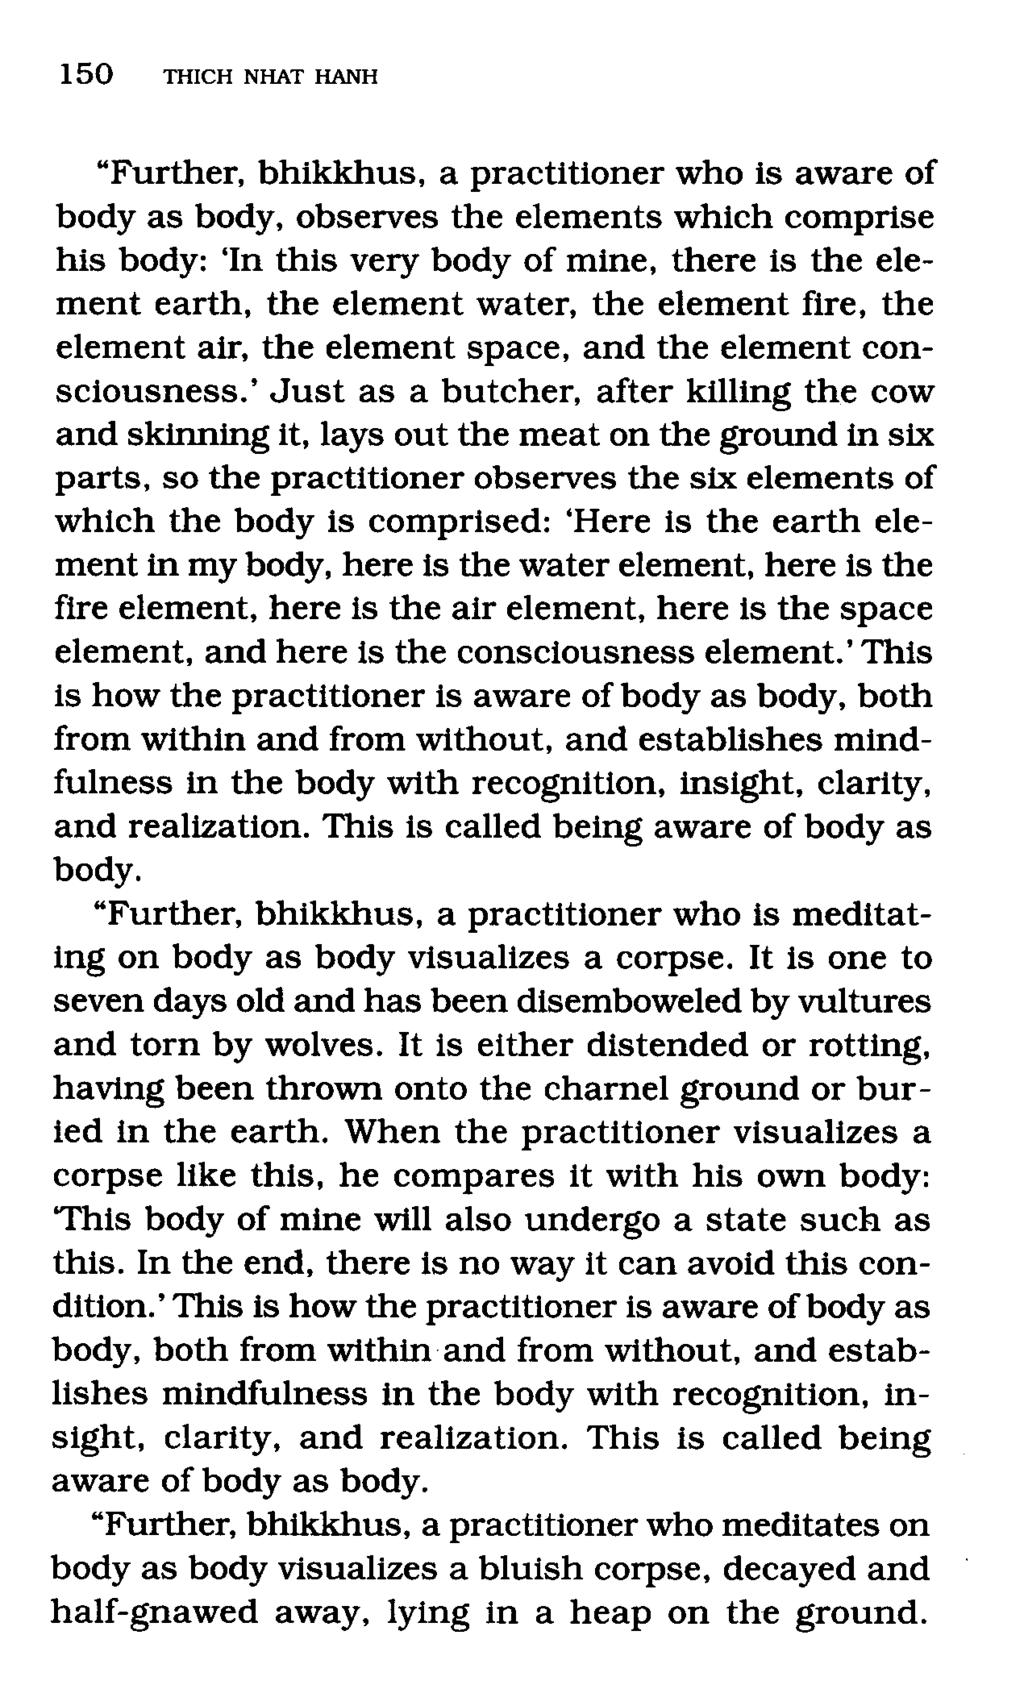 "Further, bhikkhus, a practitioner who is aware of body as body, observes the elements which comprise his body: 'In this very body of mine, there is the element earth, the element water, the element